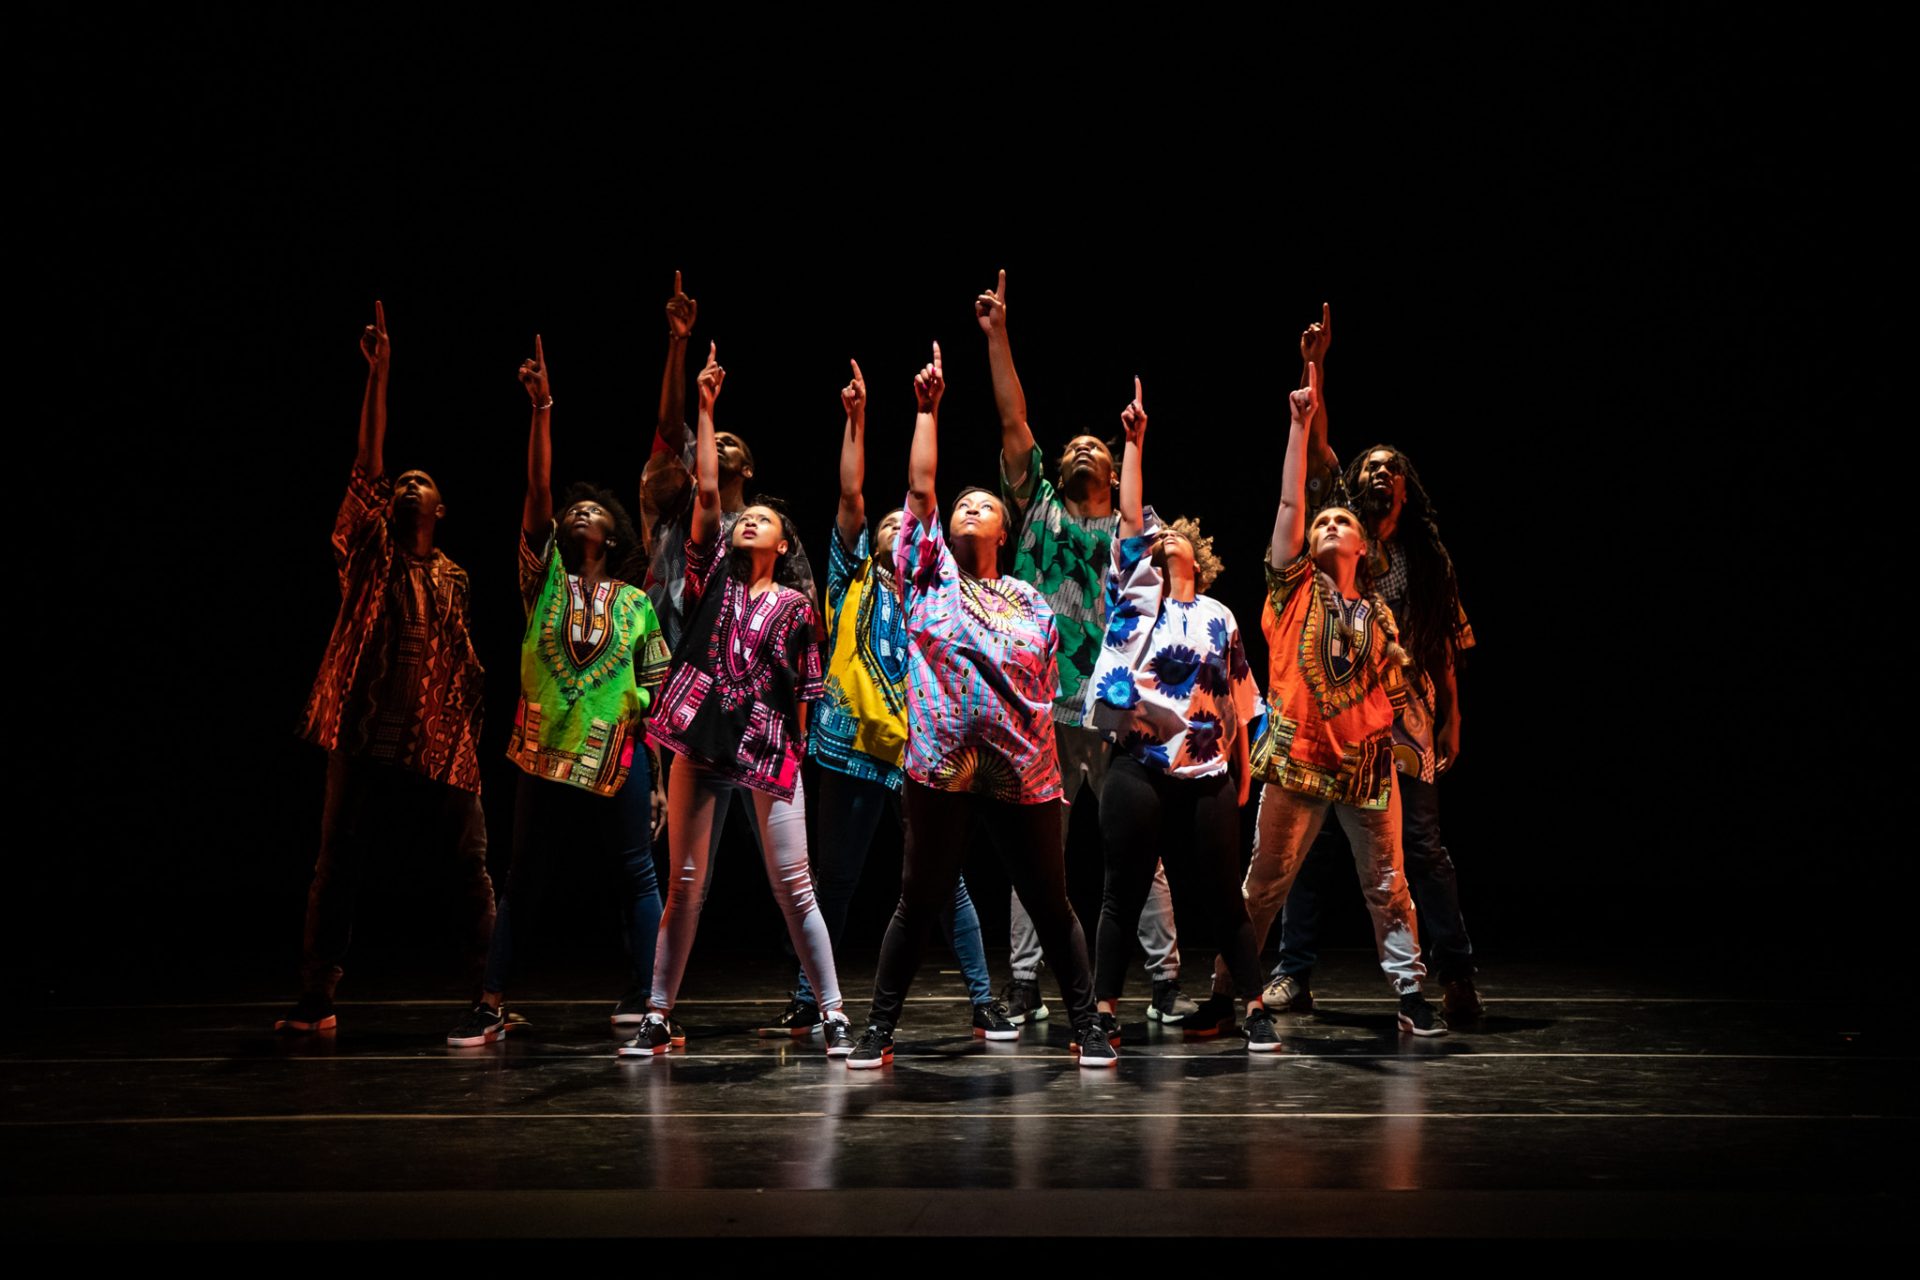 Just Sole! Street Dance Theater Company at the 32nd Annual International Conference and Festival of Blacks in Dance in Philadelphia.